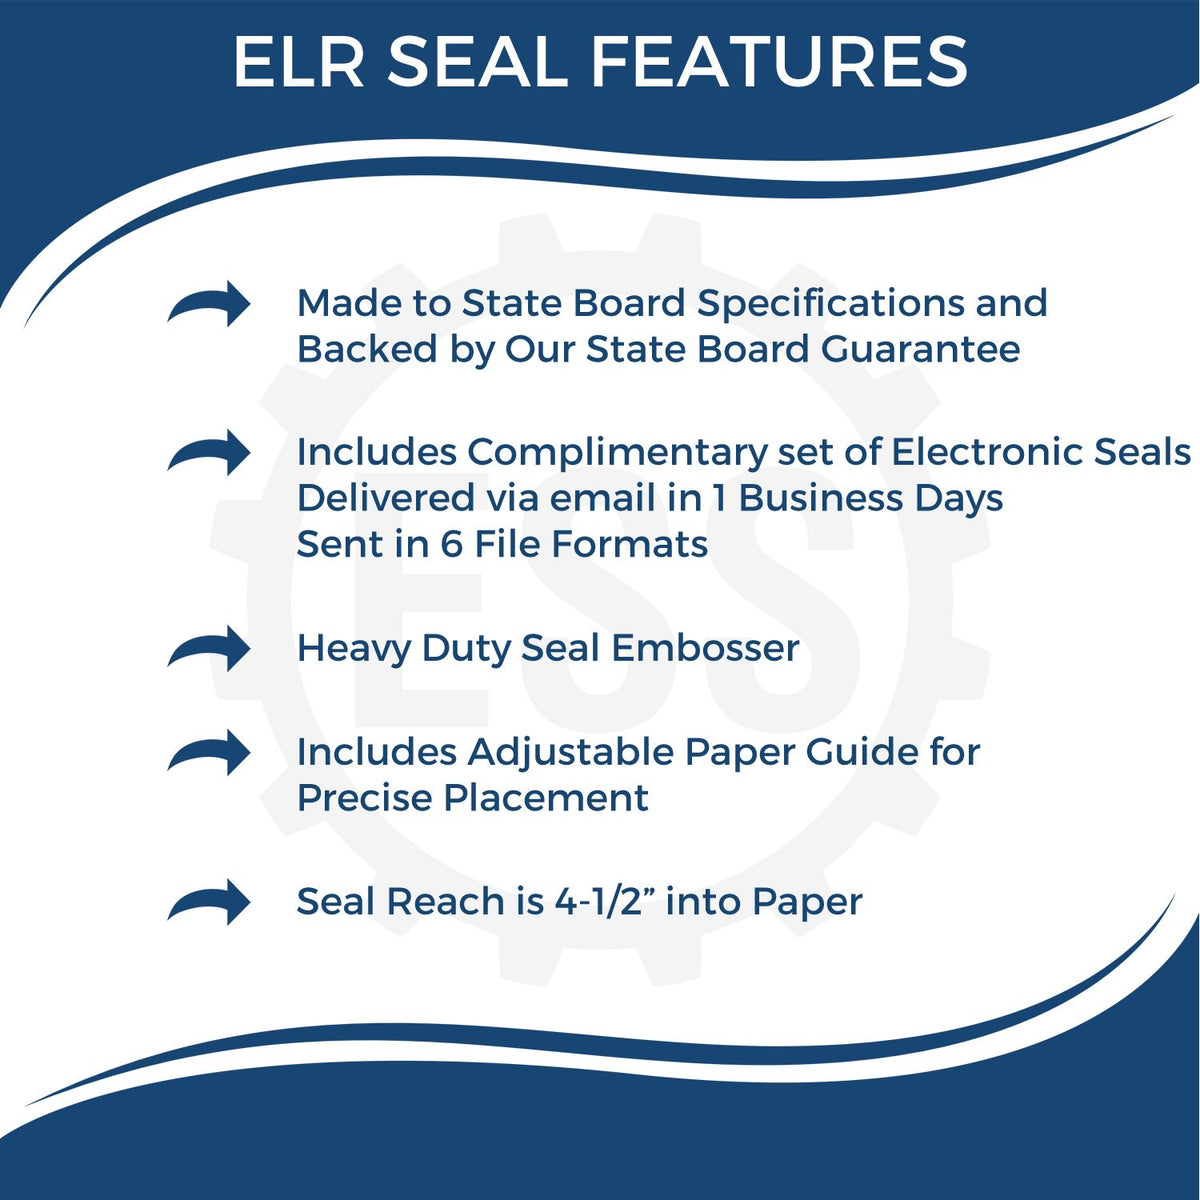 A picture of an infographic highlighting the selling points for the Extended Long Reach Florida Architect Seal Embosser